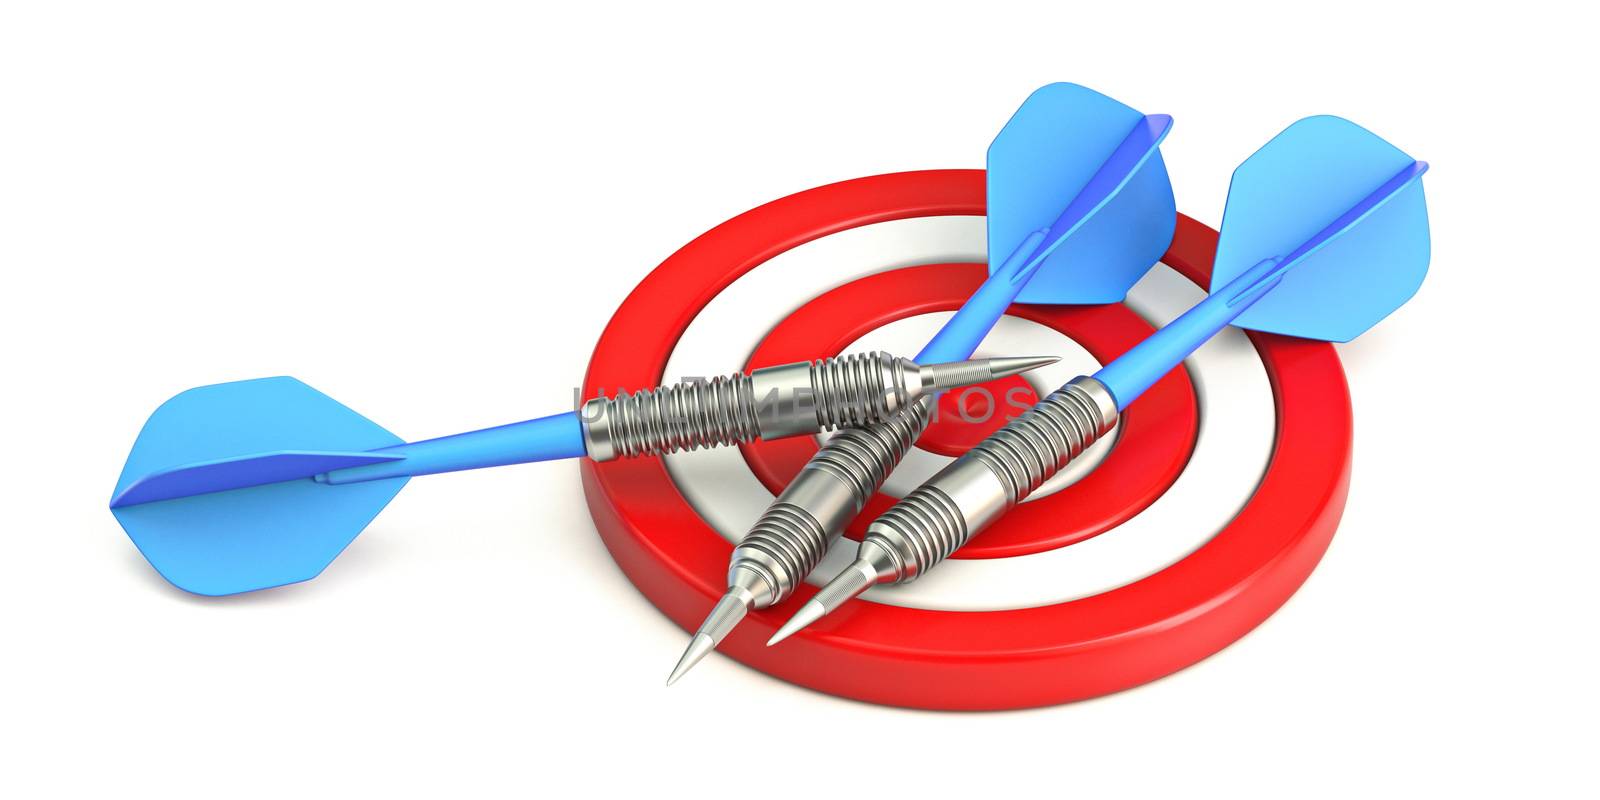 Red target with blue darts 3D render illustration isolated on white background